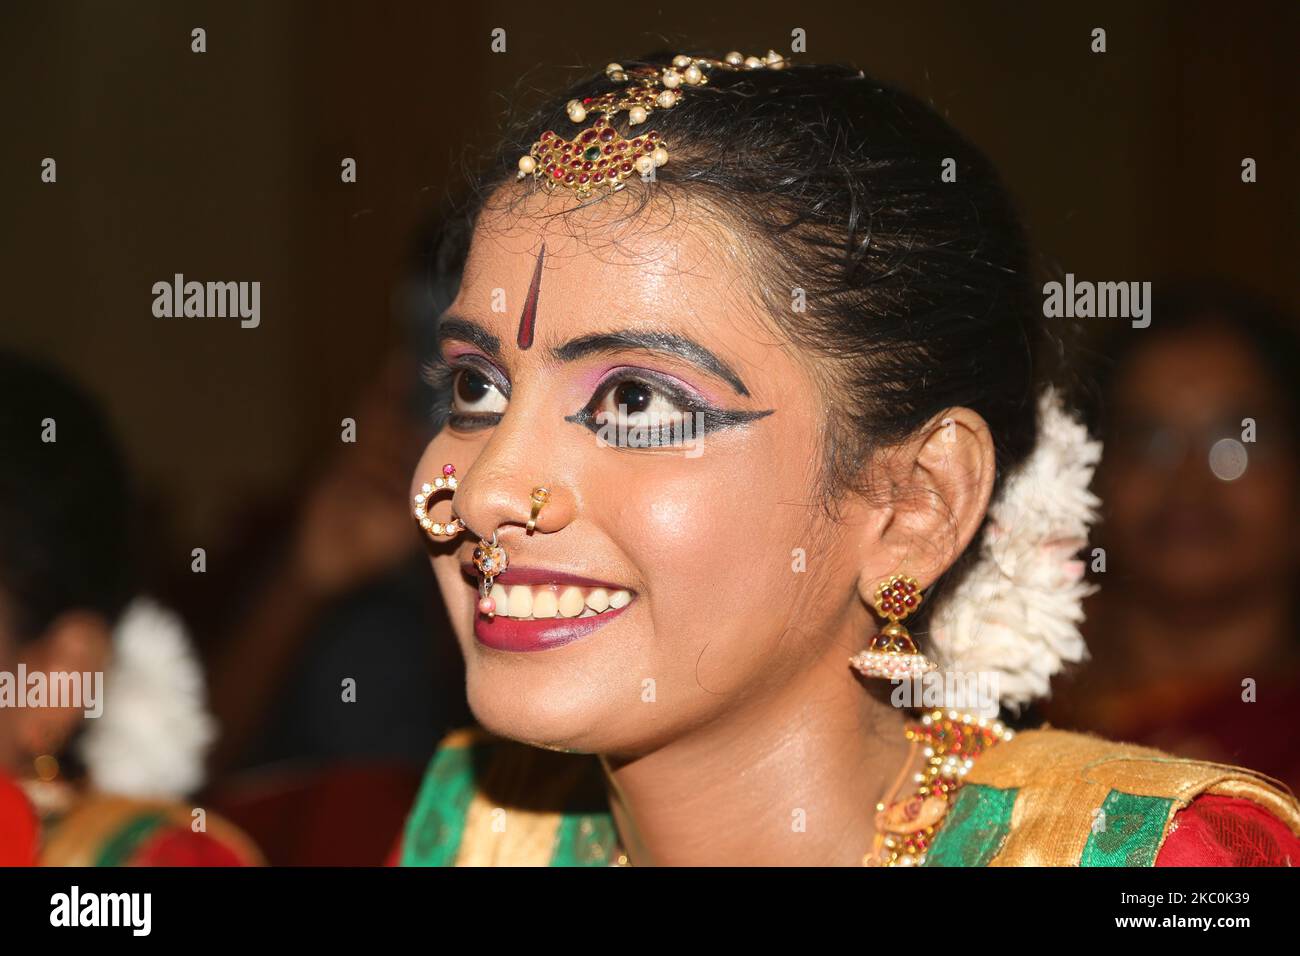 Tamil girl dressed in traditional attire waits to perform a Bharathnatyam dance during a special cultural program featuring Tamil children who were orphaned during the civil war in Jaffna, Sri Lanka, on August 12, 2017. This is just one of the many reminders of the deep scars caused during the 26-year long civil war between the Sri Lankan Army and the LTTE (Liberation Tigers of Tamil Eelam). The United Nations estimates about 40,000 people were killed during the war. (Photo by Creative Touch Imaging Ltd./NurPhoto) Stock Photo